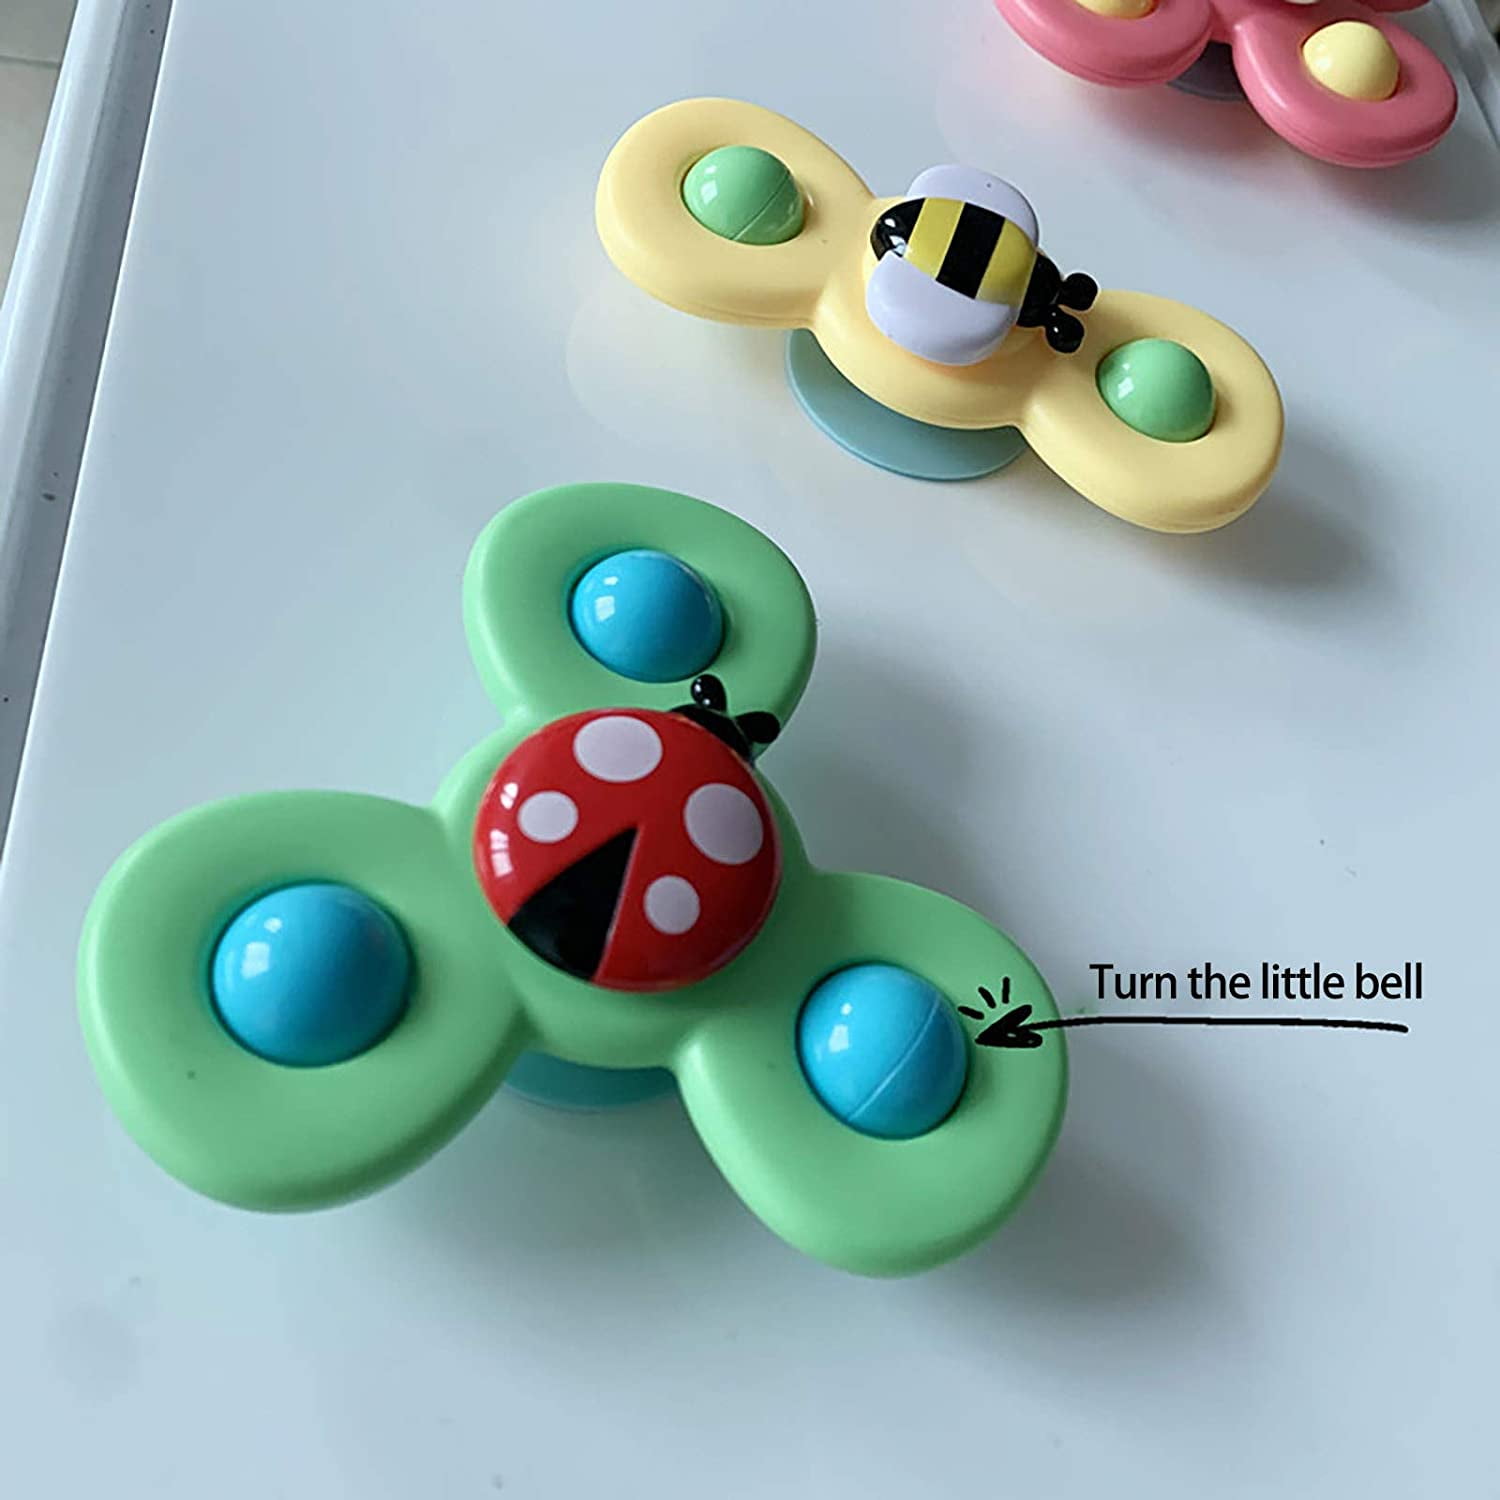 Purelemon Suction Cup Spinning Top Toy Baby Toy Spin Sucker Spinning Top Spinner Toy Safe Interesting Table Sucker Gameplay Early Learner Toys for Baby Toys Children Kids Girls Boys 